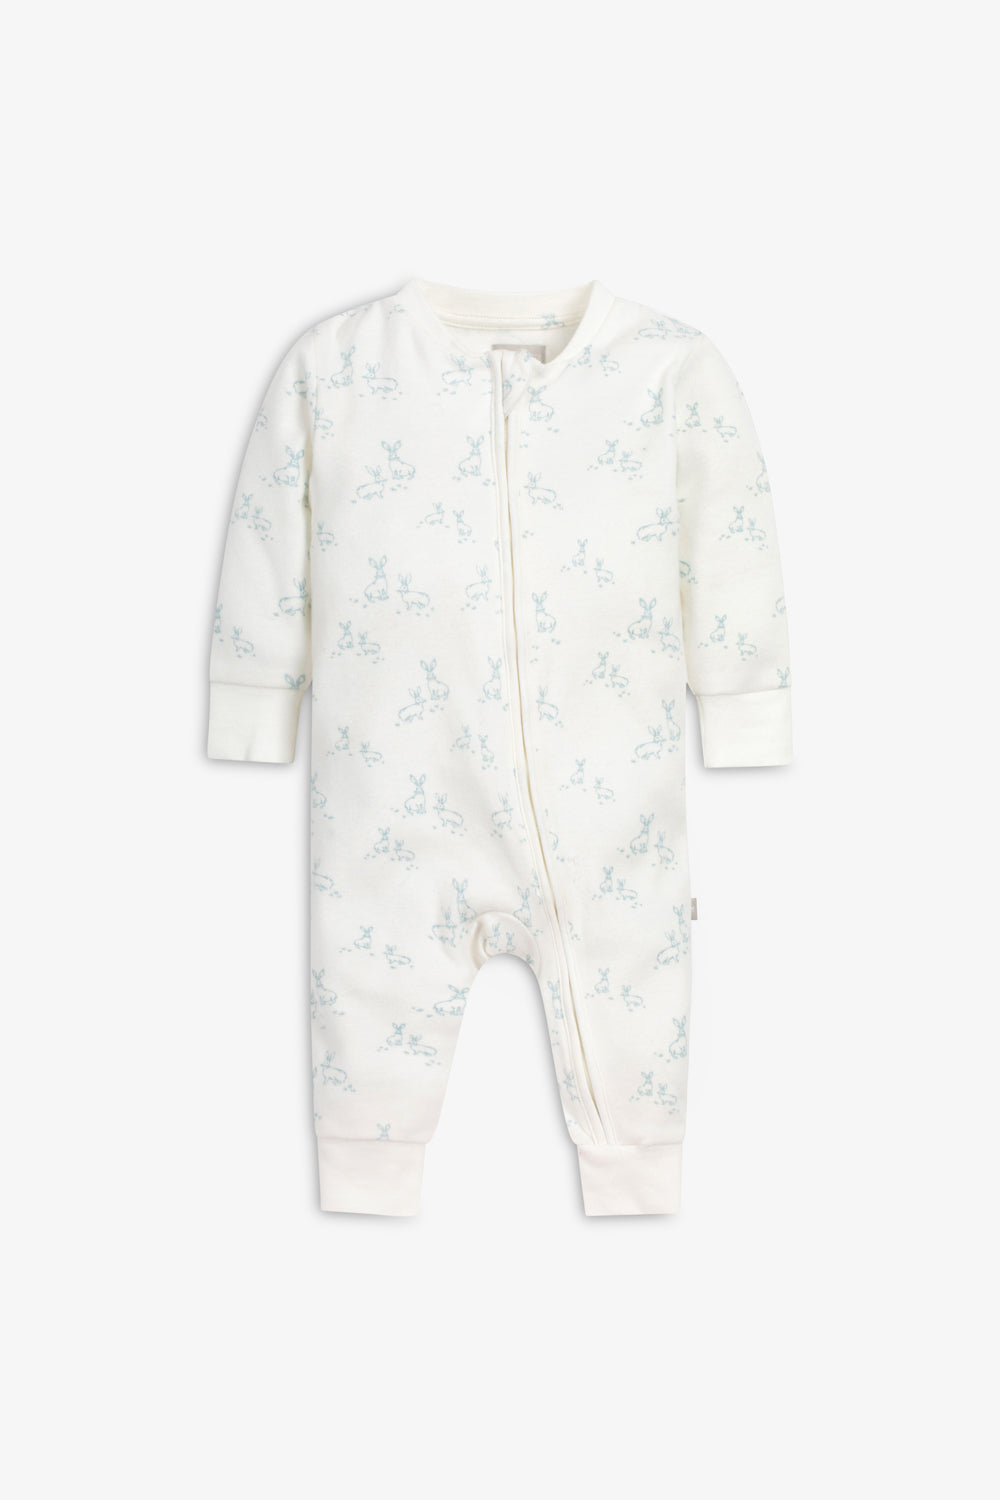 Sleepsuit and Bunny Gift Set, little blue hare print